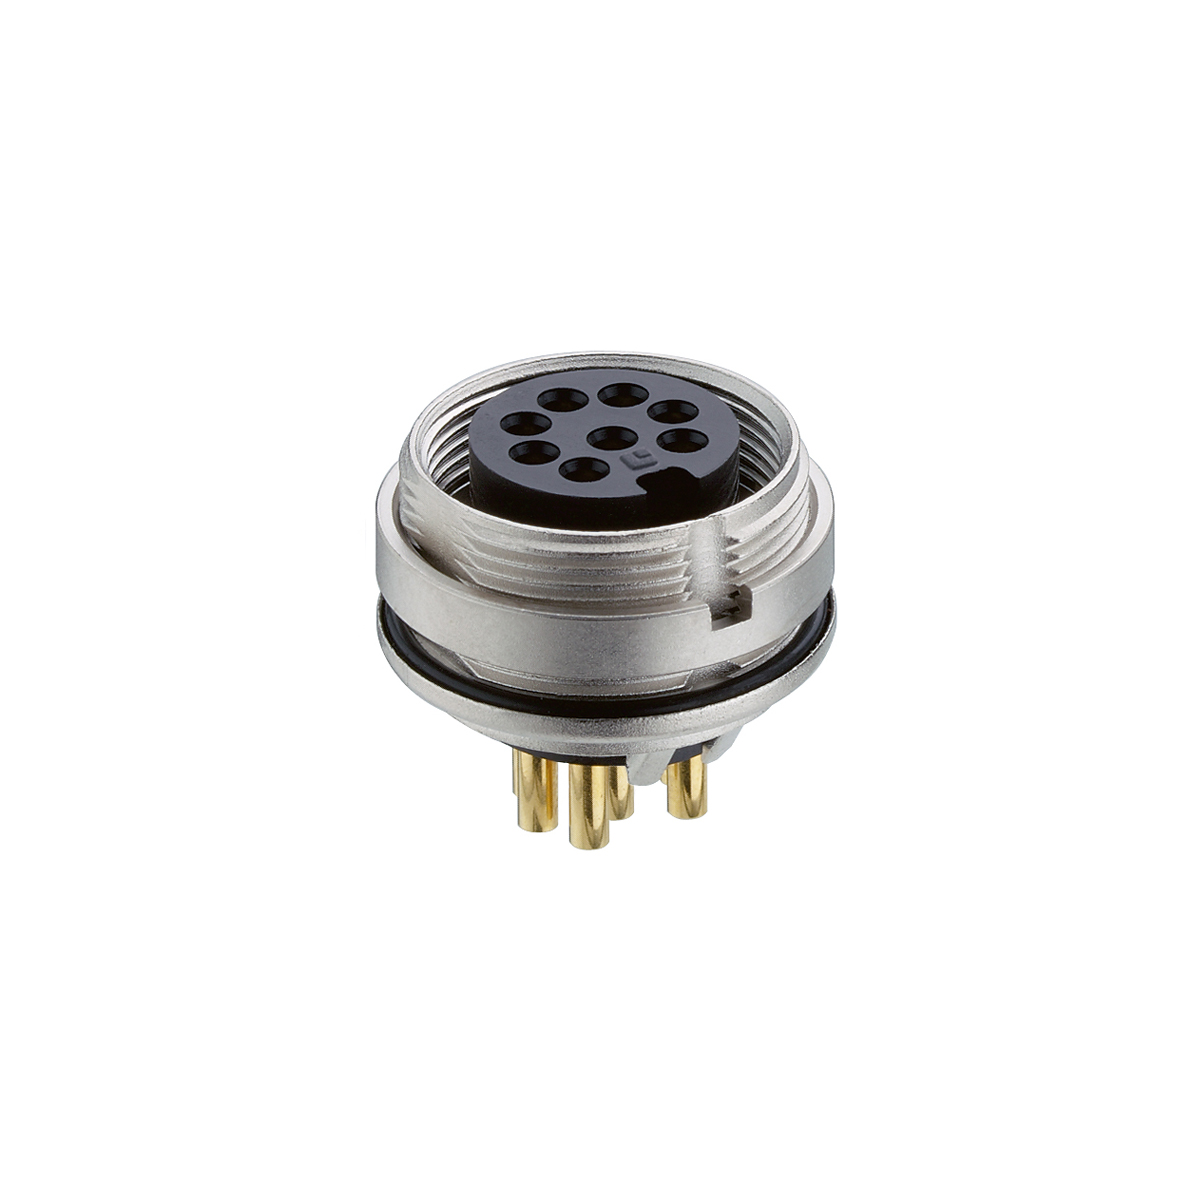 Lumberg: 0305-2 (Series 03 | Circular connectors with threaded joint M16 acc. to IEC 61076-2-106, IP40/IP68)